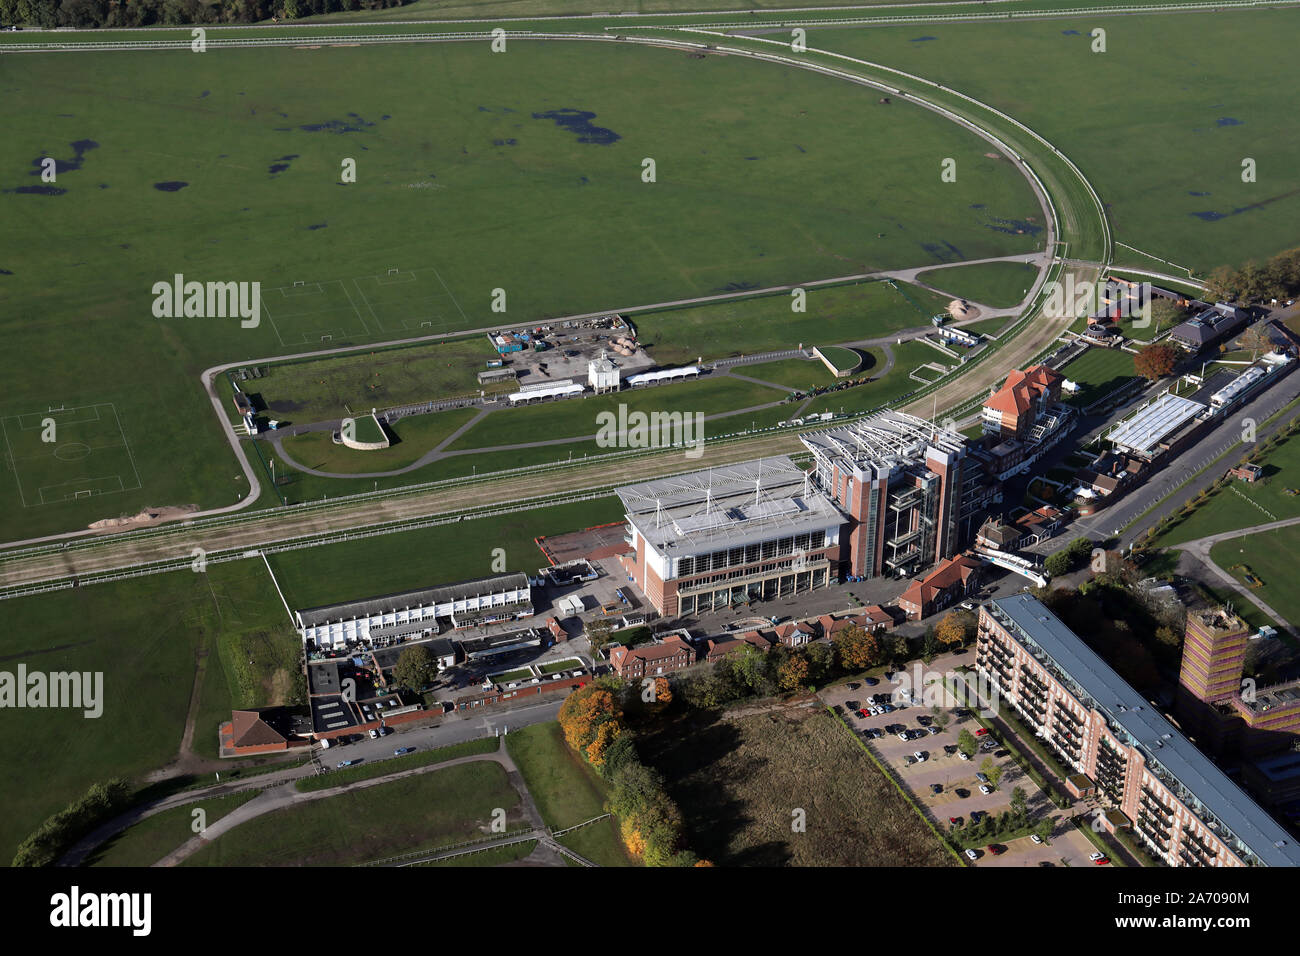 aerial view of the spectator stands at York Racecourse Stock Photo